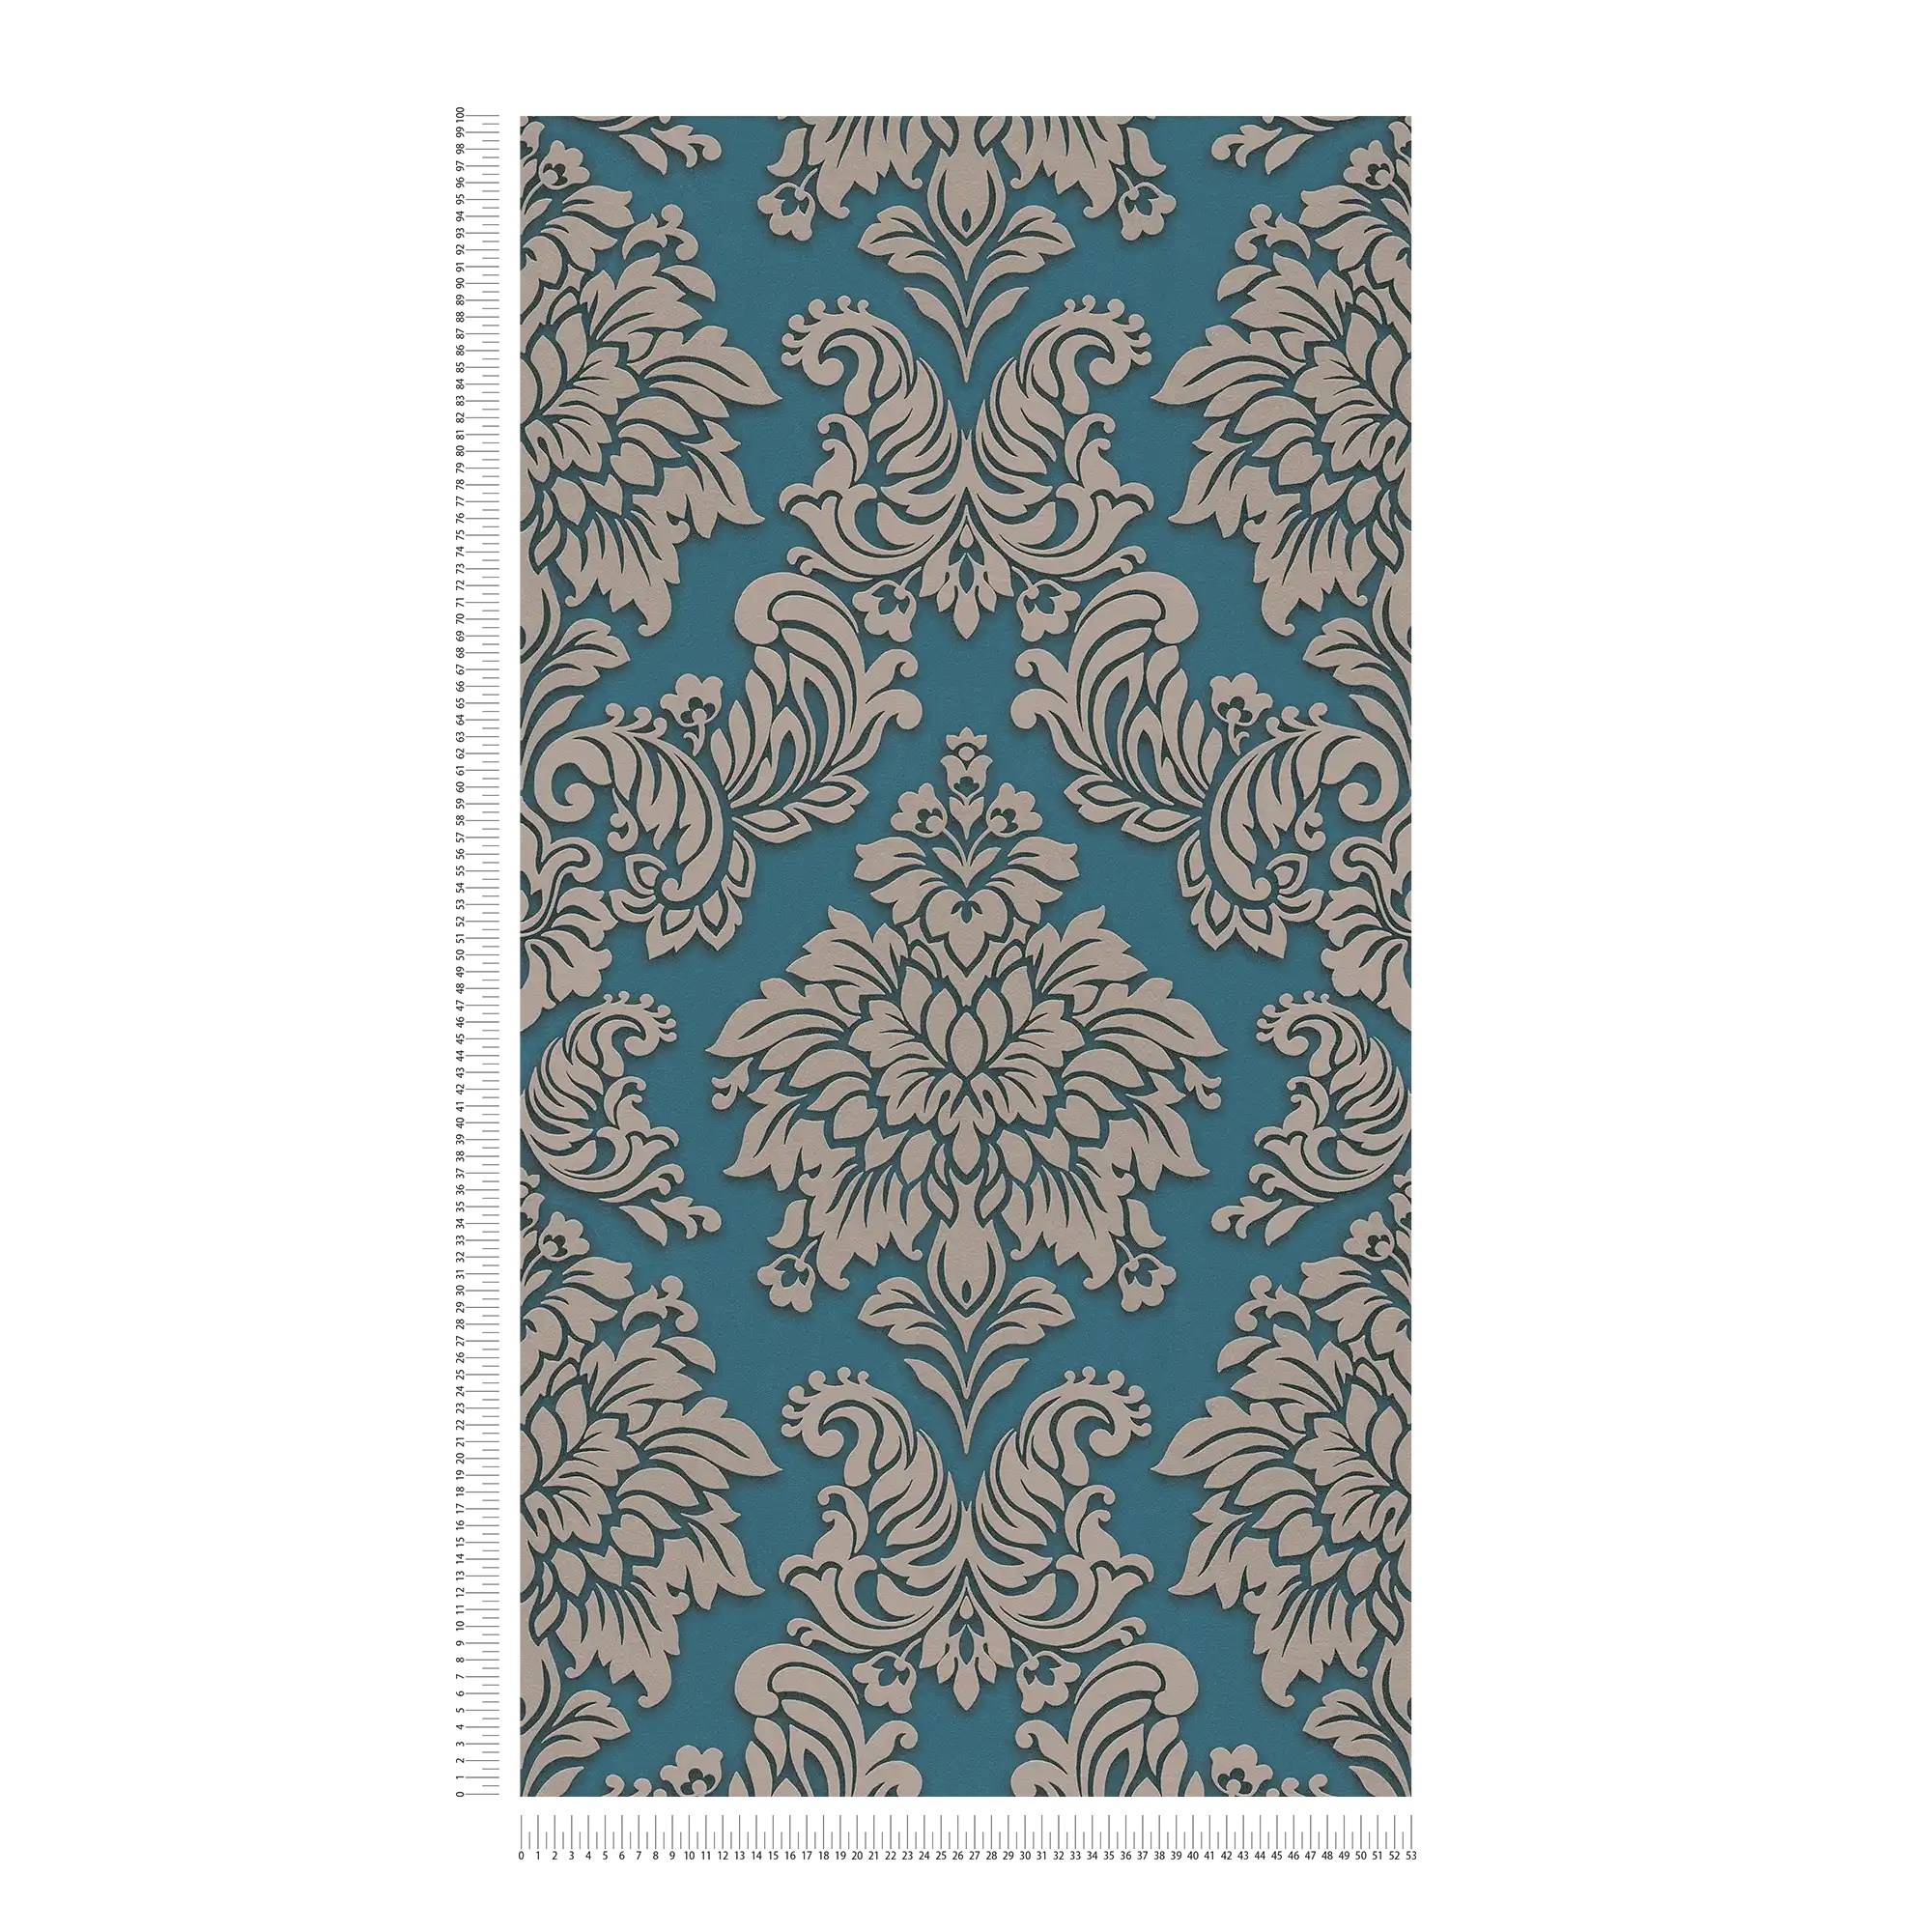             Baroque wallpaper ornaments with glitter effect - blue, silver, beige
        